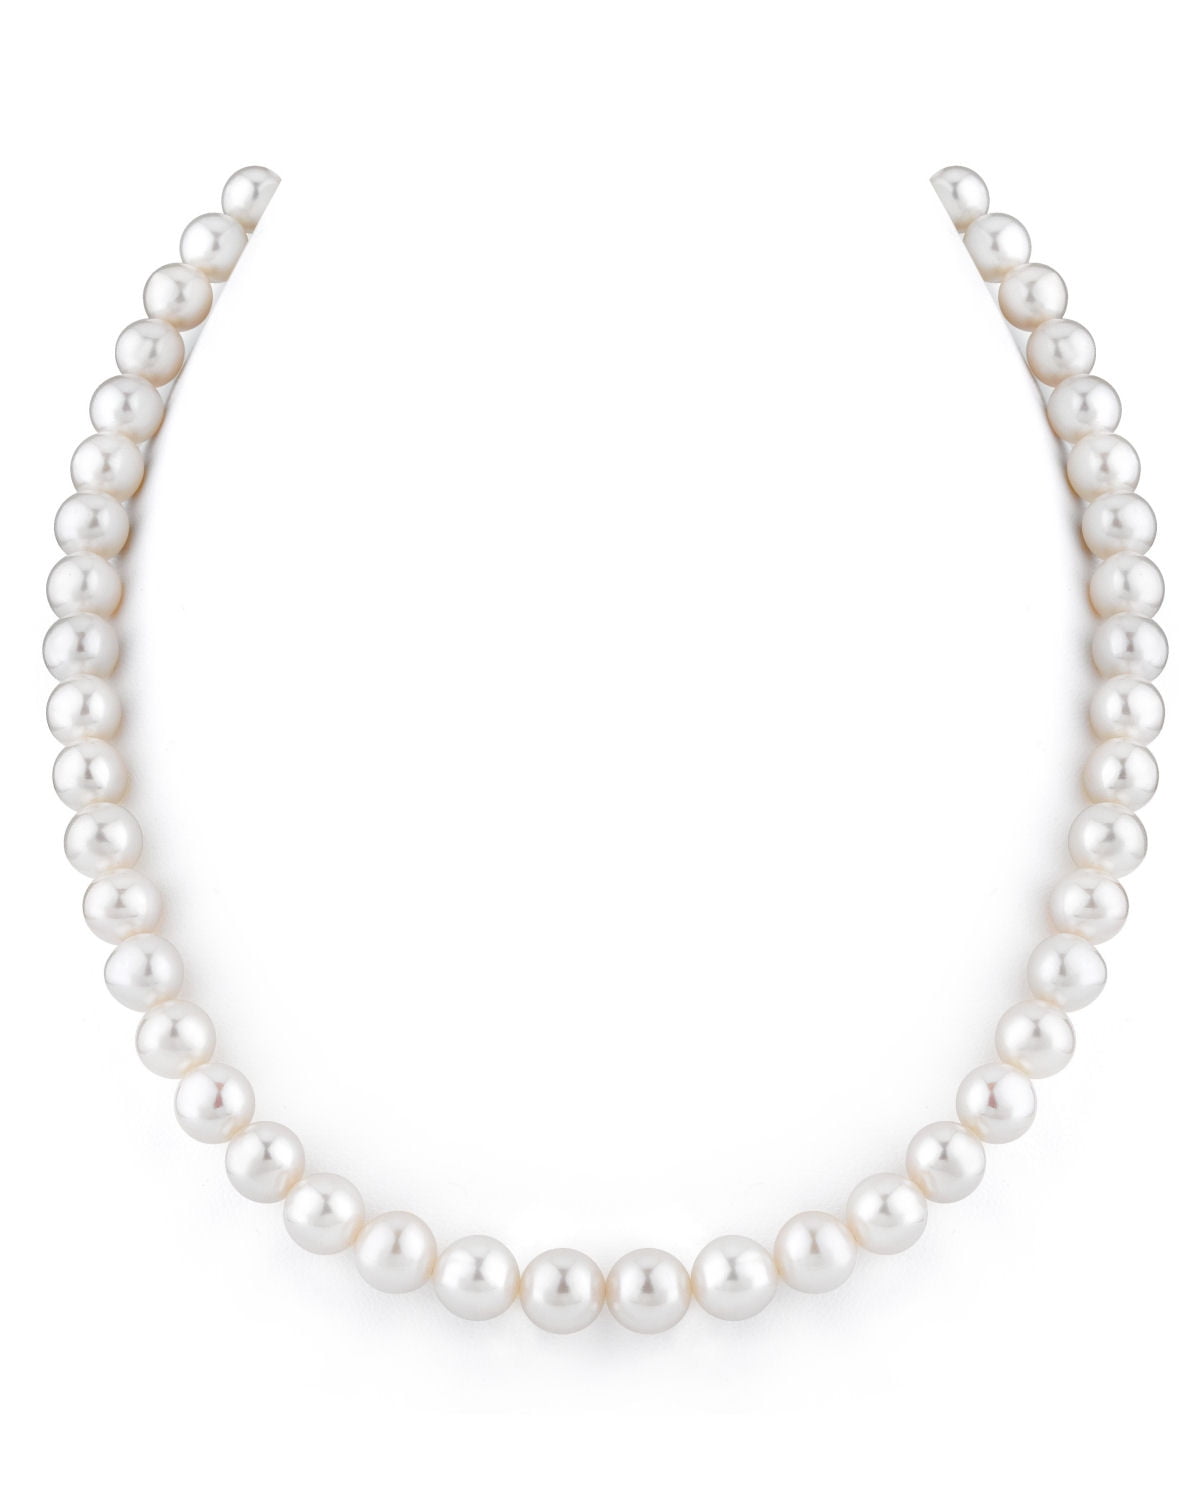 16 Inch Choker Length AAAA Quality 14K Gold 6.5-7.0mm White Freshwater Round Cultured Pearl Necklace